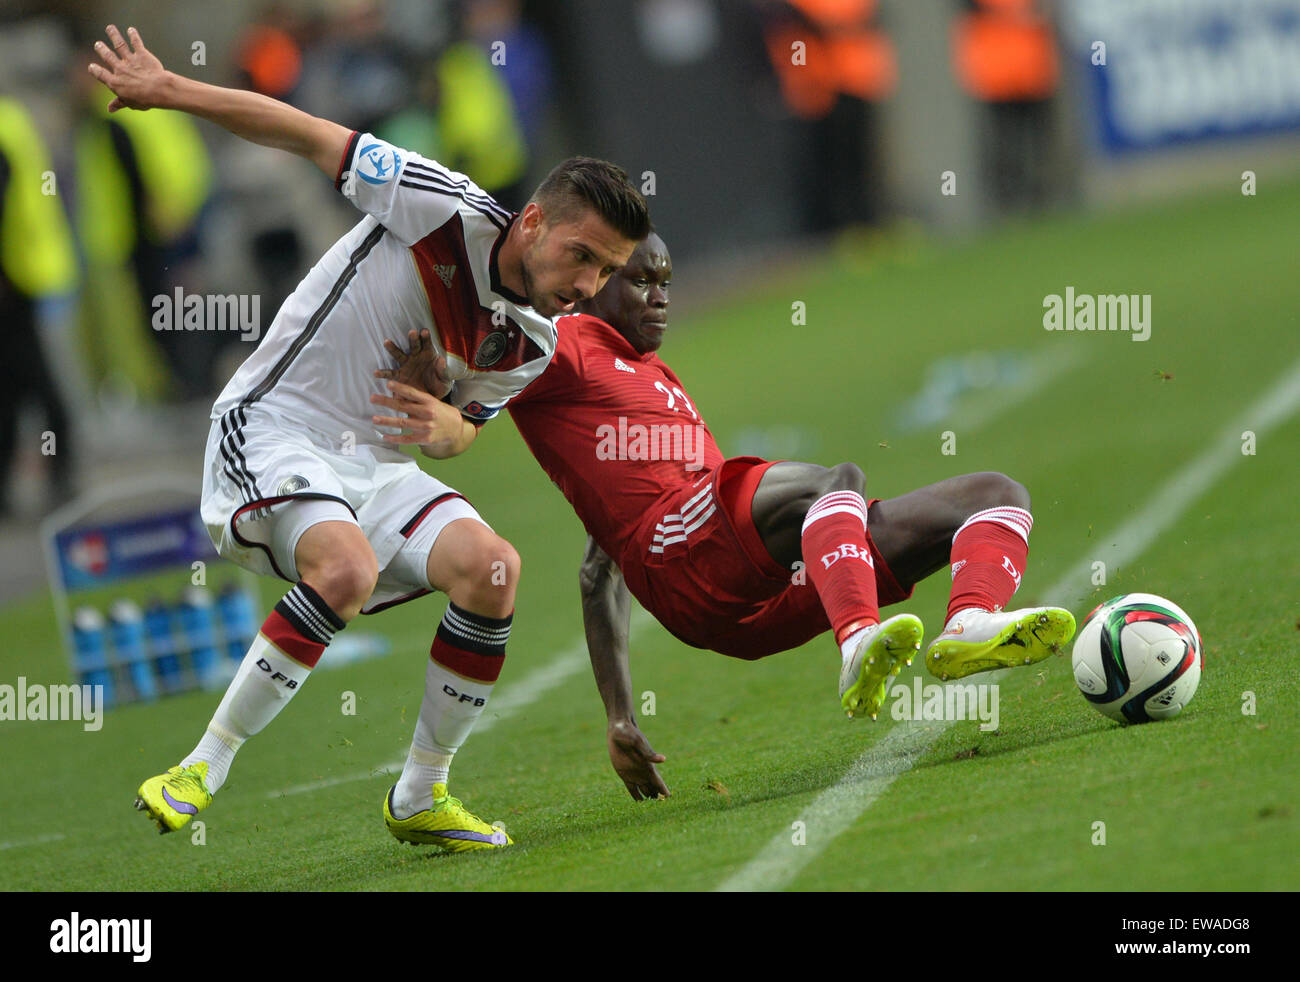 Prague, Czech Republic. 20th June, 2015. Germany's Julian Korb (l) and Pione Sisto of Denmark vie for the ball during the UEFA Under-21 European Championships 2015 group A soccer match between Germany and Denmark at Eden Stadium in Prague, Czech Republic, 20 June 2015. Photo: Peter Kneffel/dpa/Alamy Live News Stock Photo